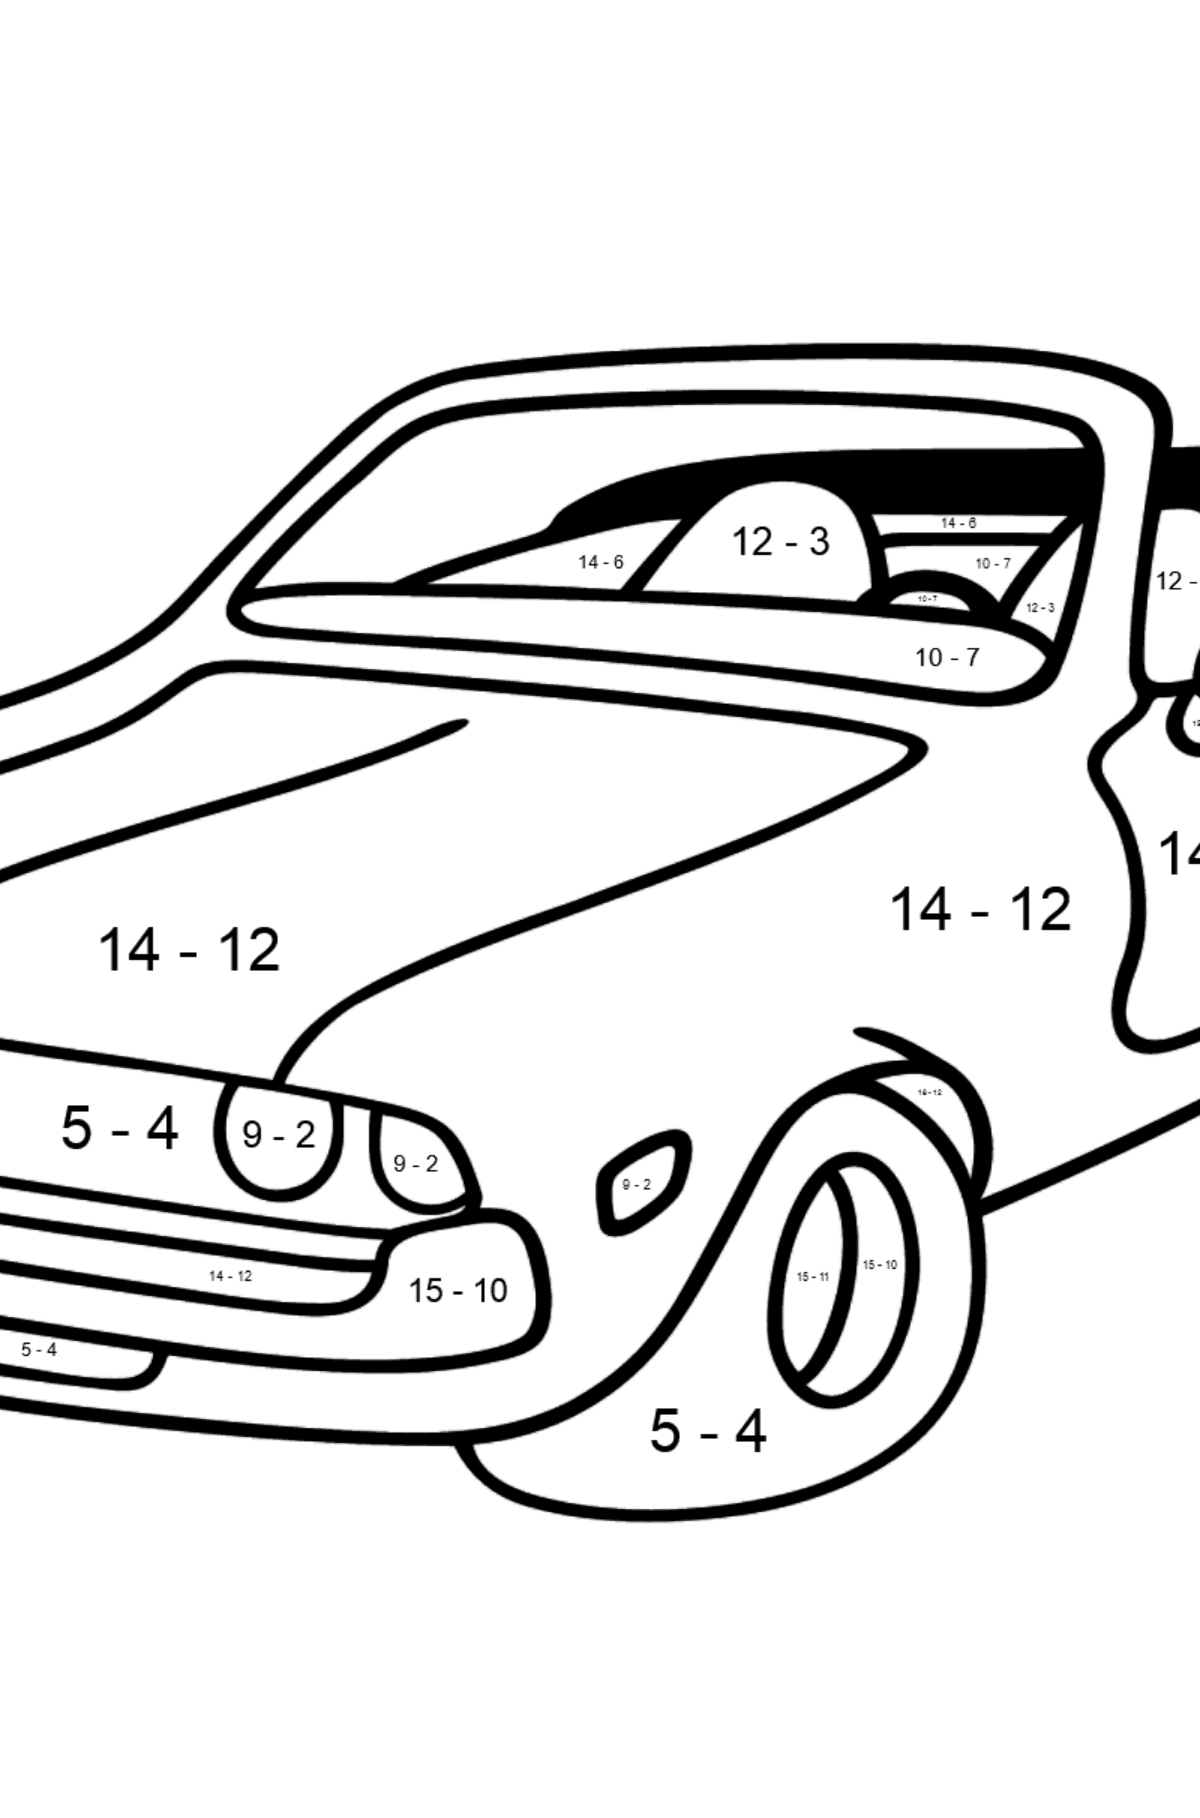 Open Top Cars coloring page - Math Coloring - Subtraction for Kids